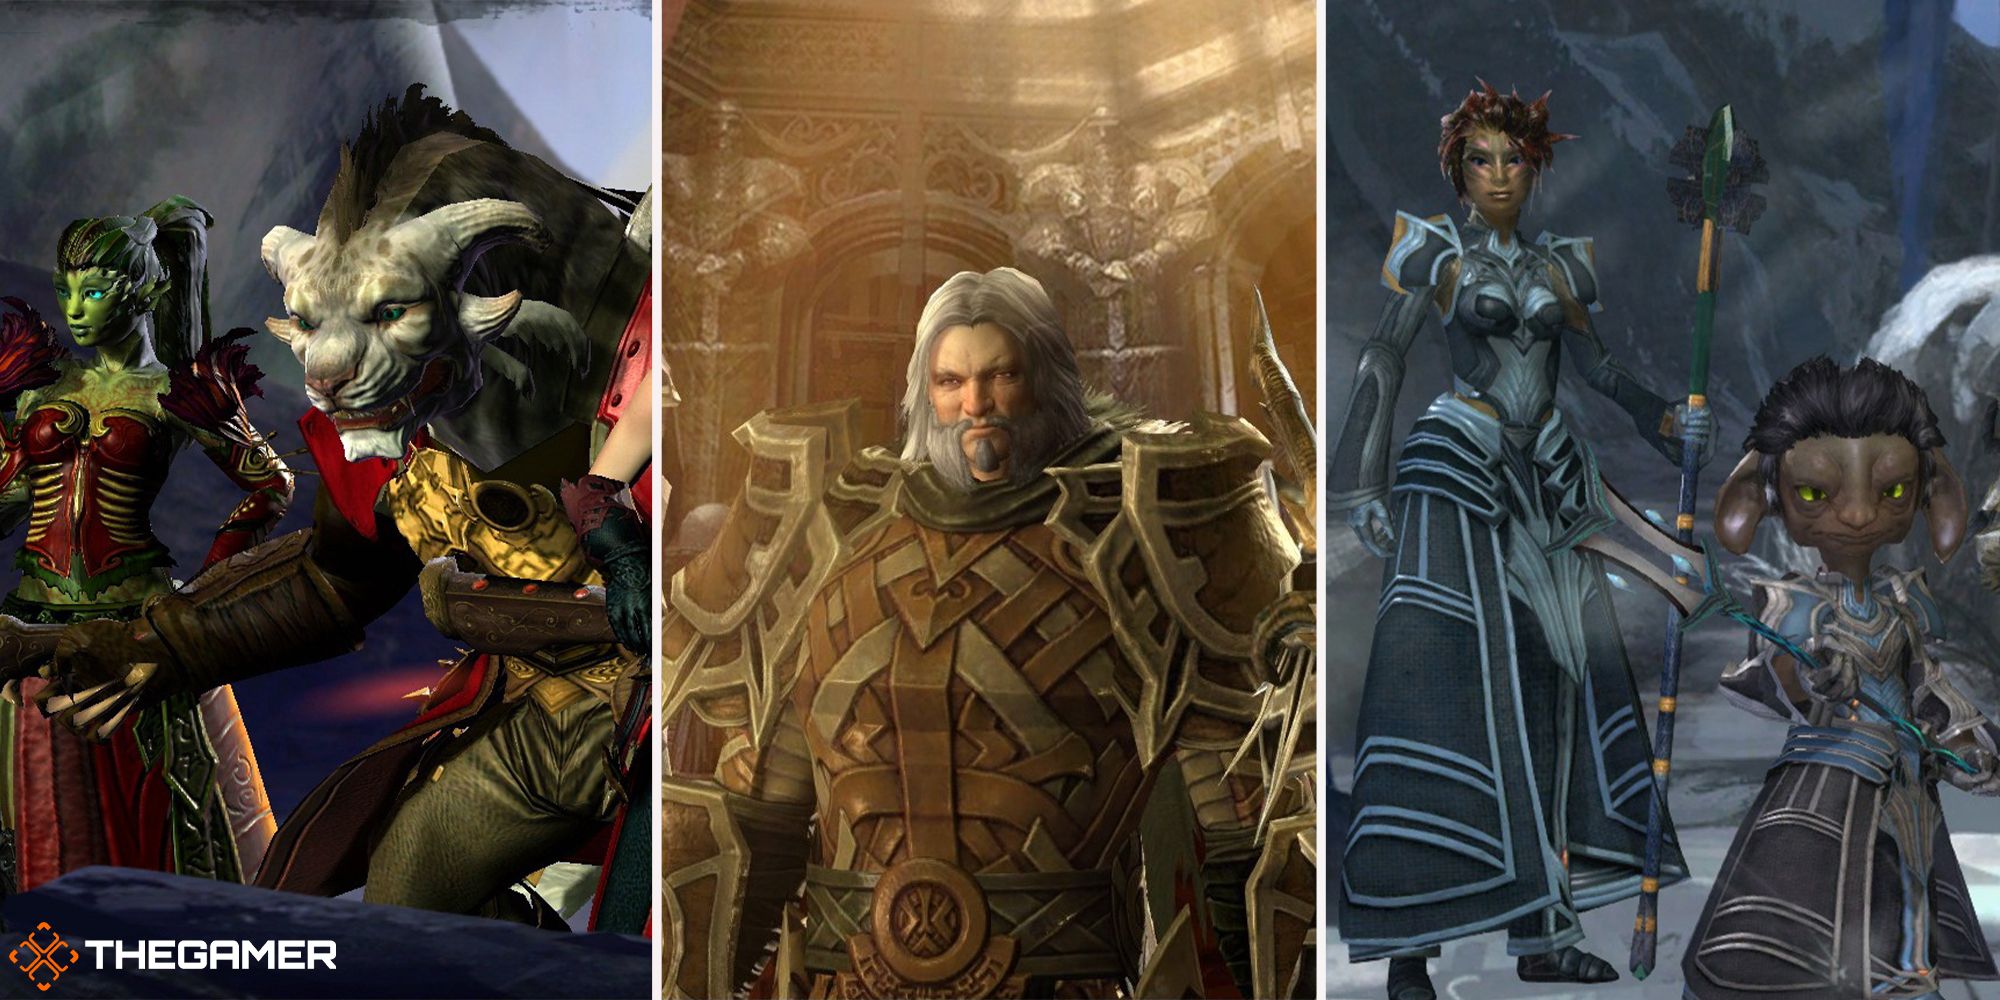 Guild Wars 2 - the vigil member (centre), the durmand priory members (right), the order of whispers members (left)